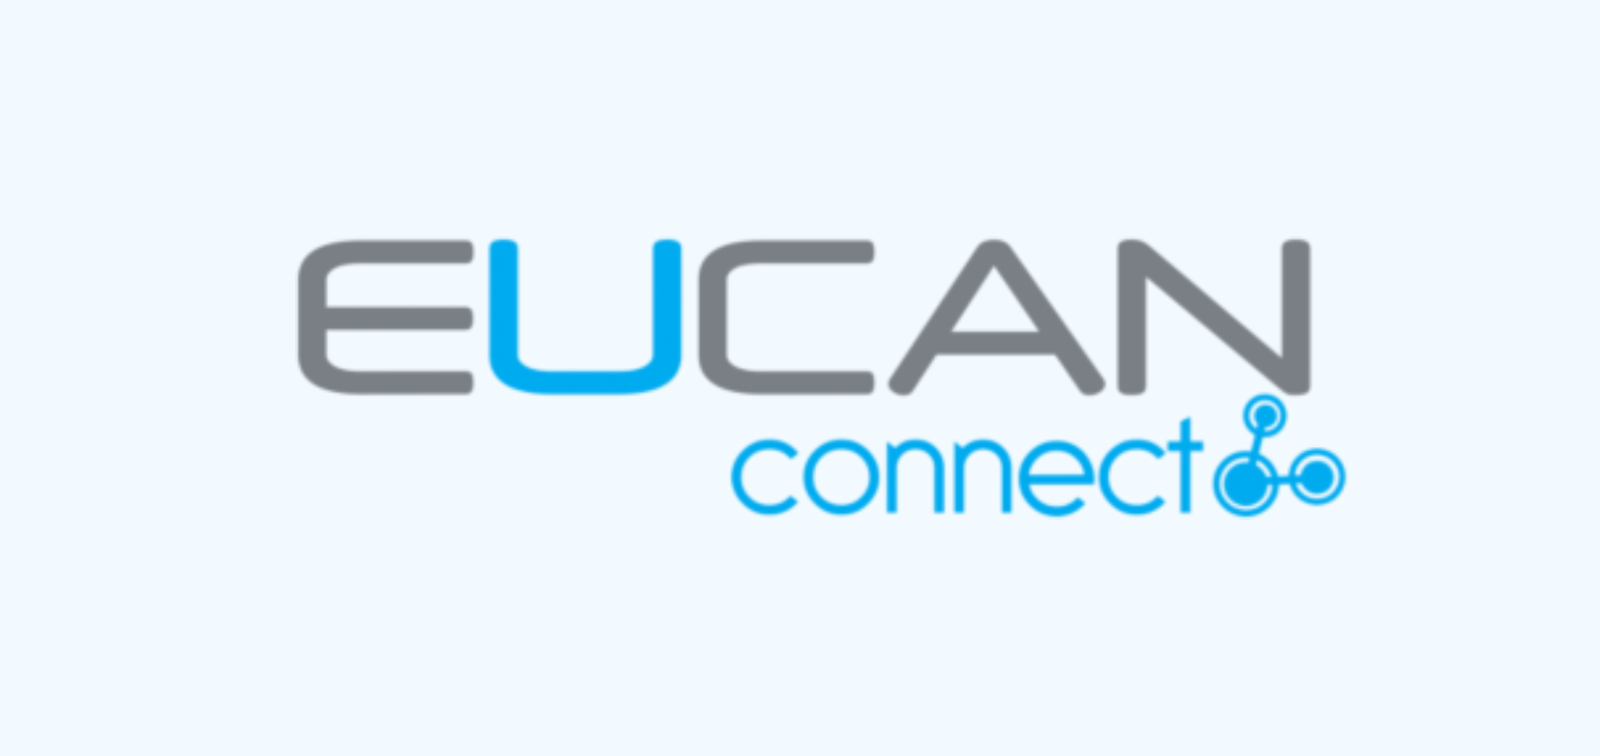 EUCAN-connect project